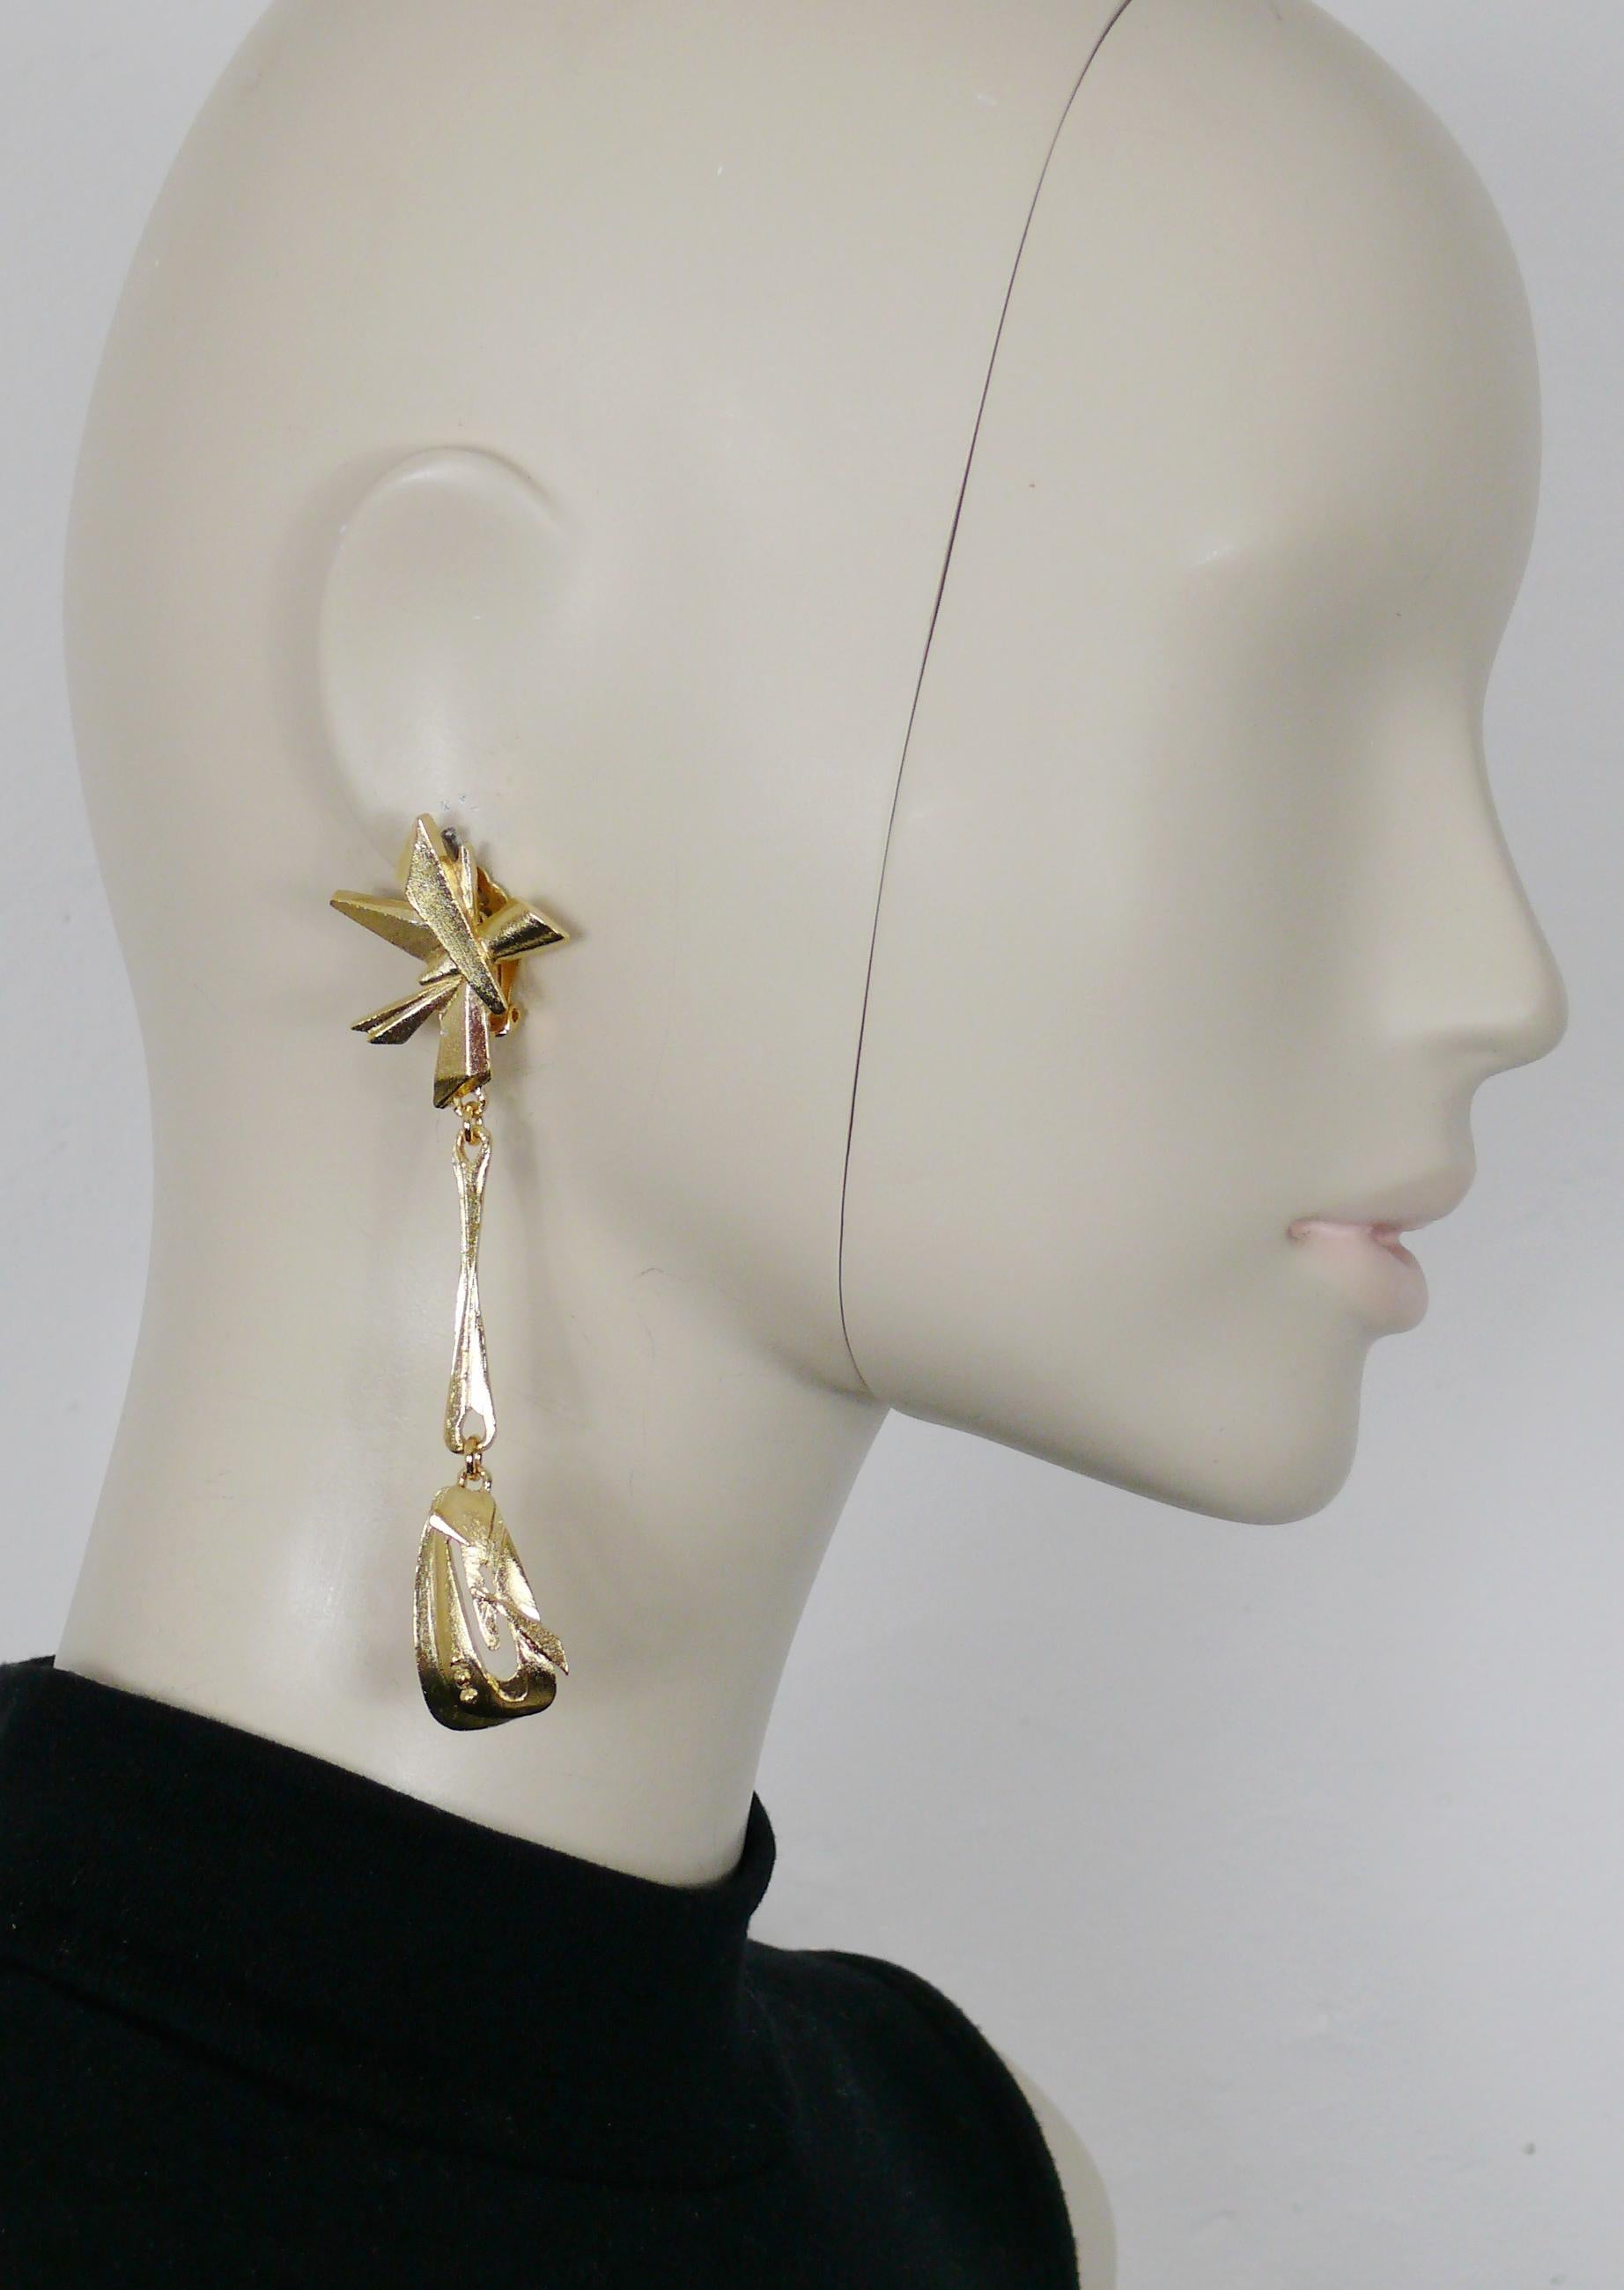 CHRISTIAN LACROIX vintage gold toned dangling earrings (clip-on) featuring an abstract design.

Marked CHRISTIAN LACROIX CL Made in France.

Indicative measurements : max. height approx. 11 cm (4.33 inches) / max. width approx 3.2 cm (1.26